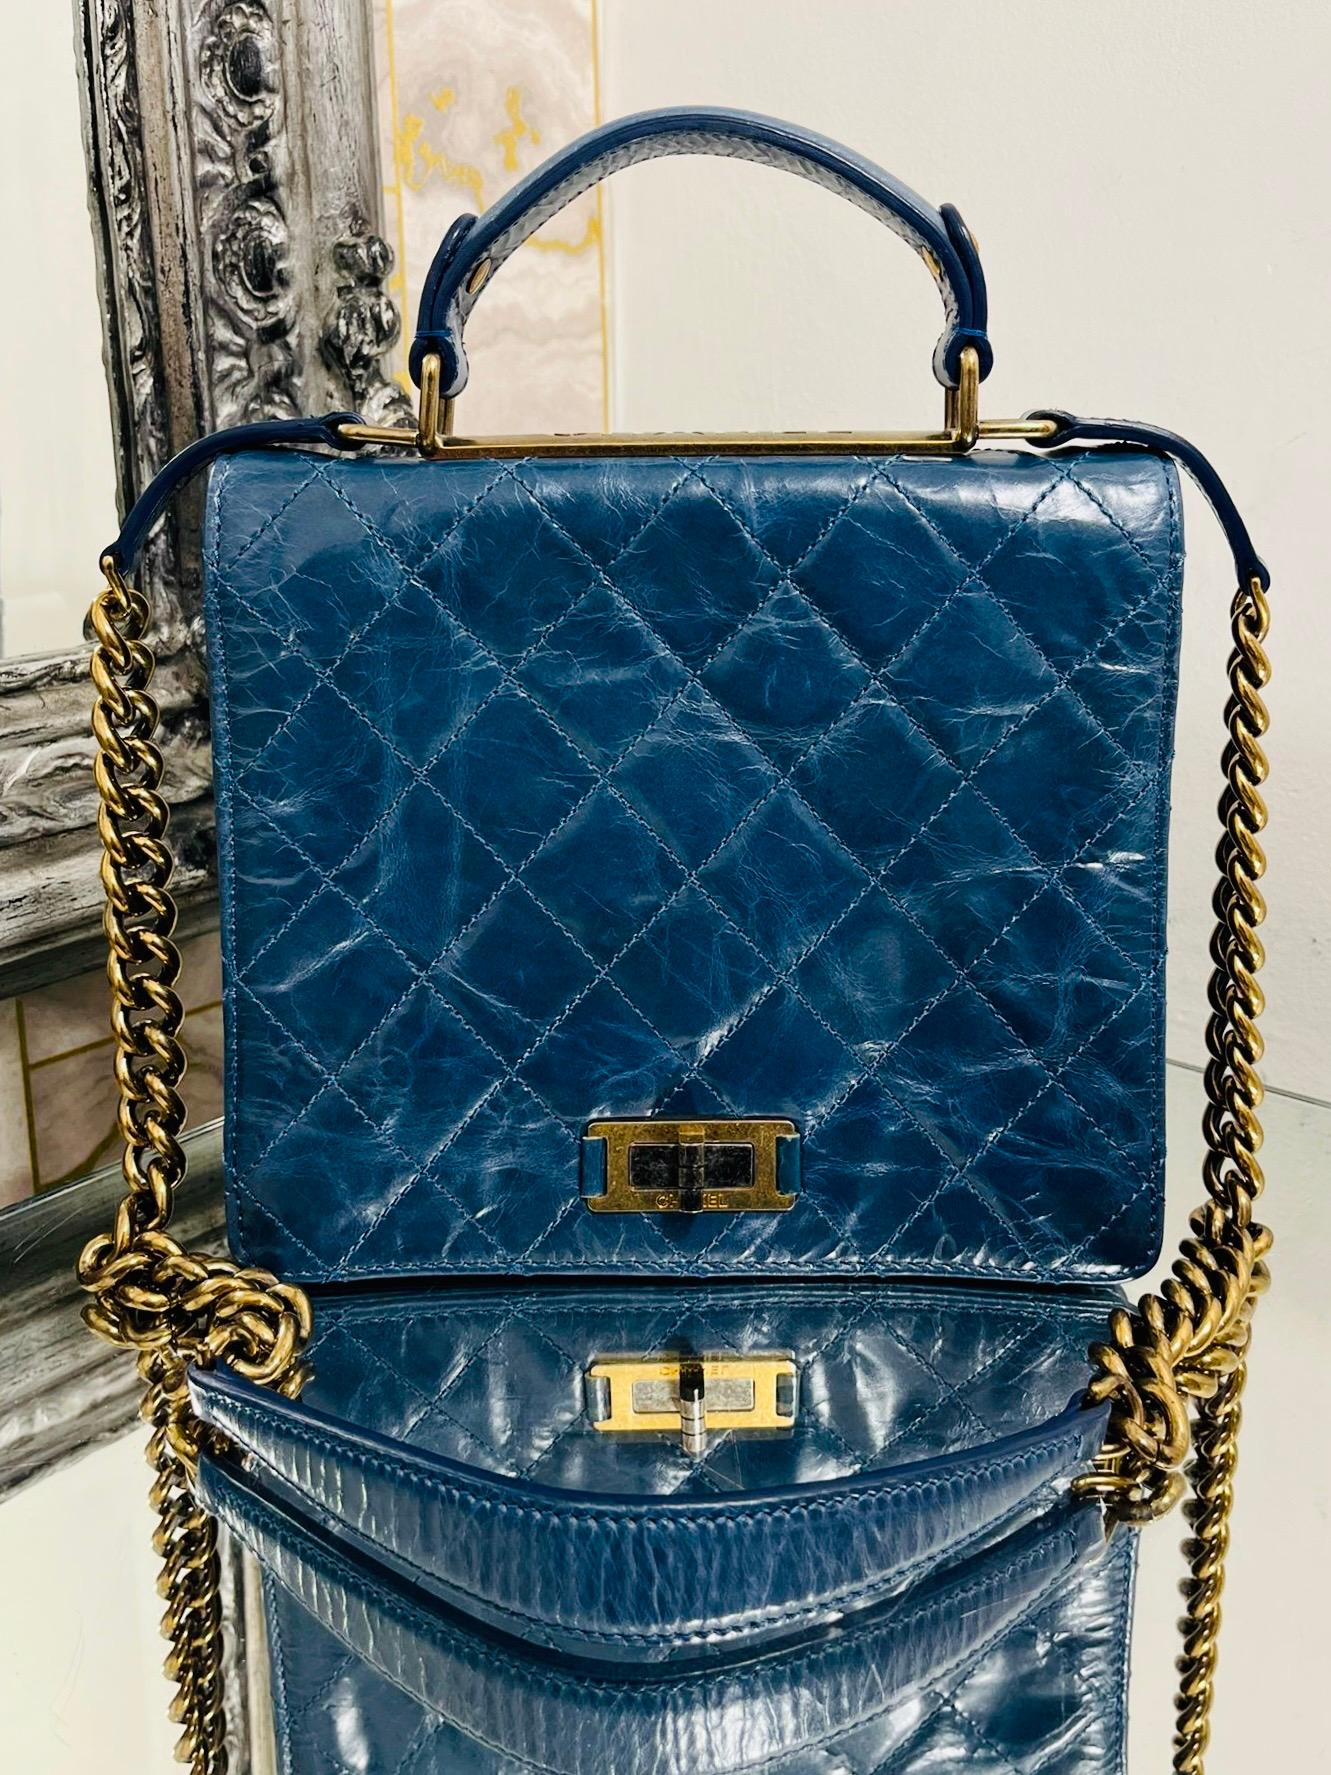 Chanel Trendy Aged Leather Bag

From 2011 collection, in blue aged leather with gold antique hardware.

Flap with re-issue iconic closure. On the top of the bag is a gold plate with 

large 'CHANEL' engraved lettering. Top leather carry handle and